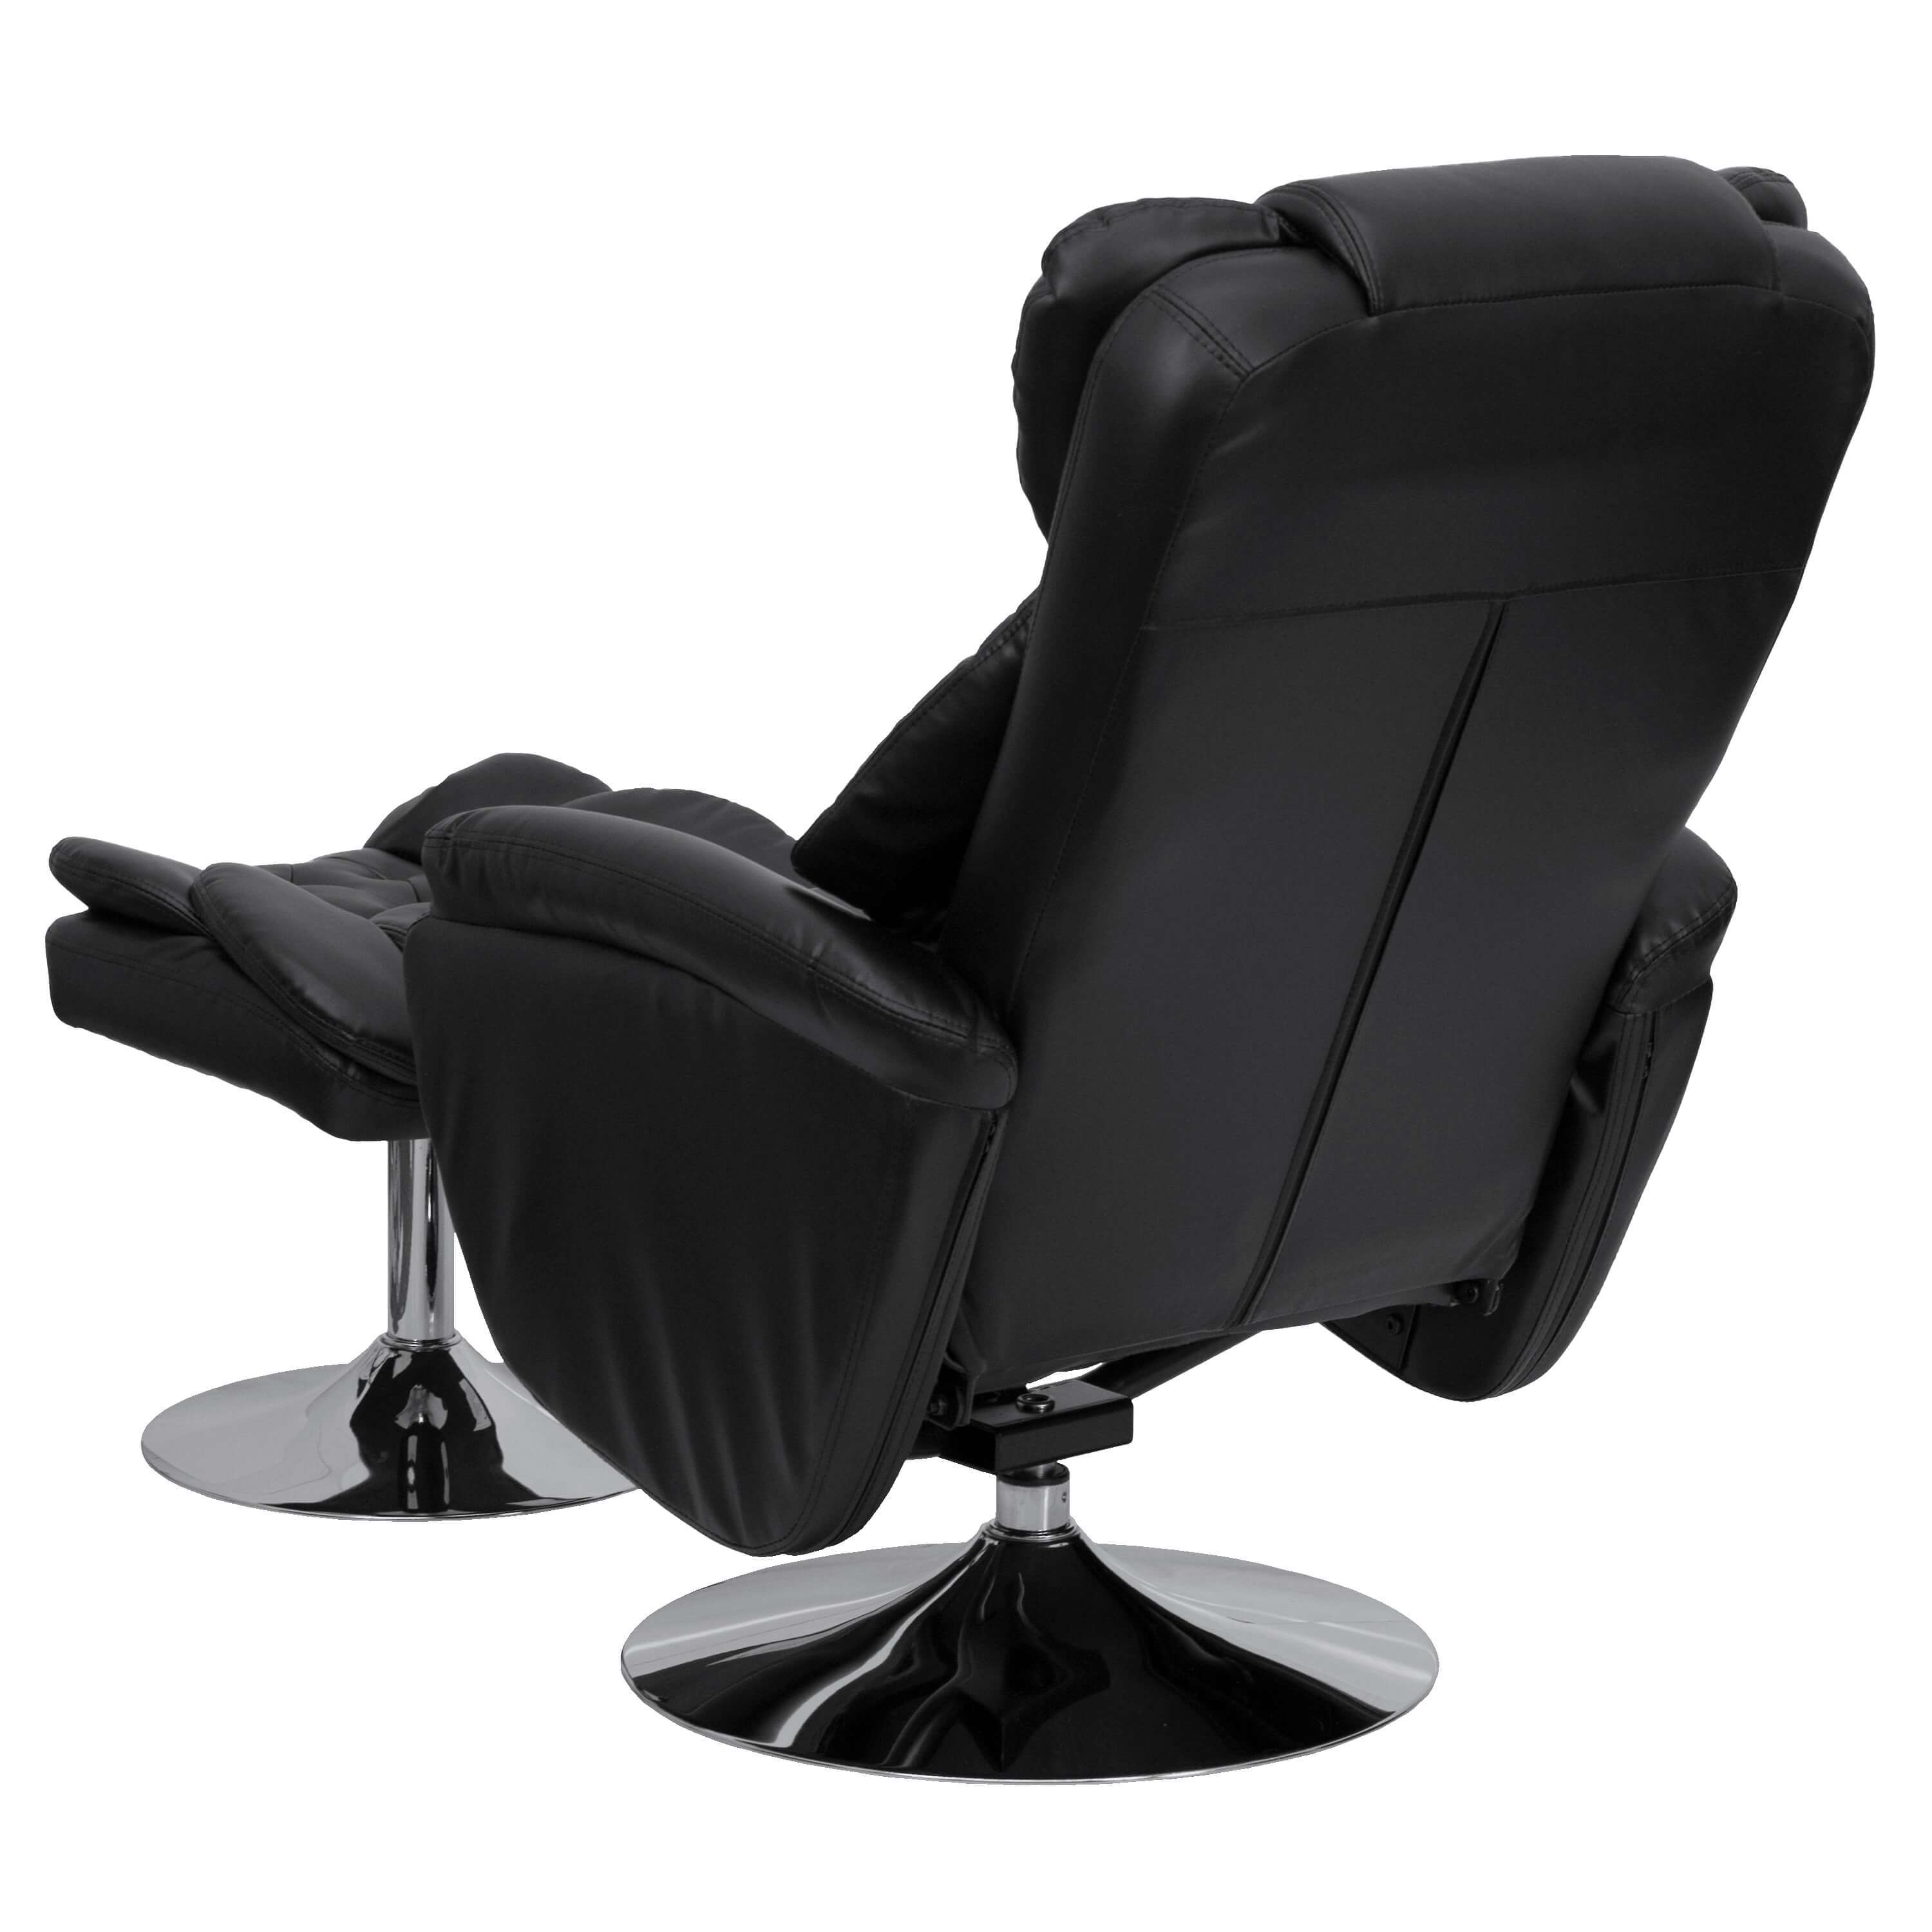 Black leather recliner chair back view